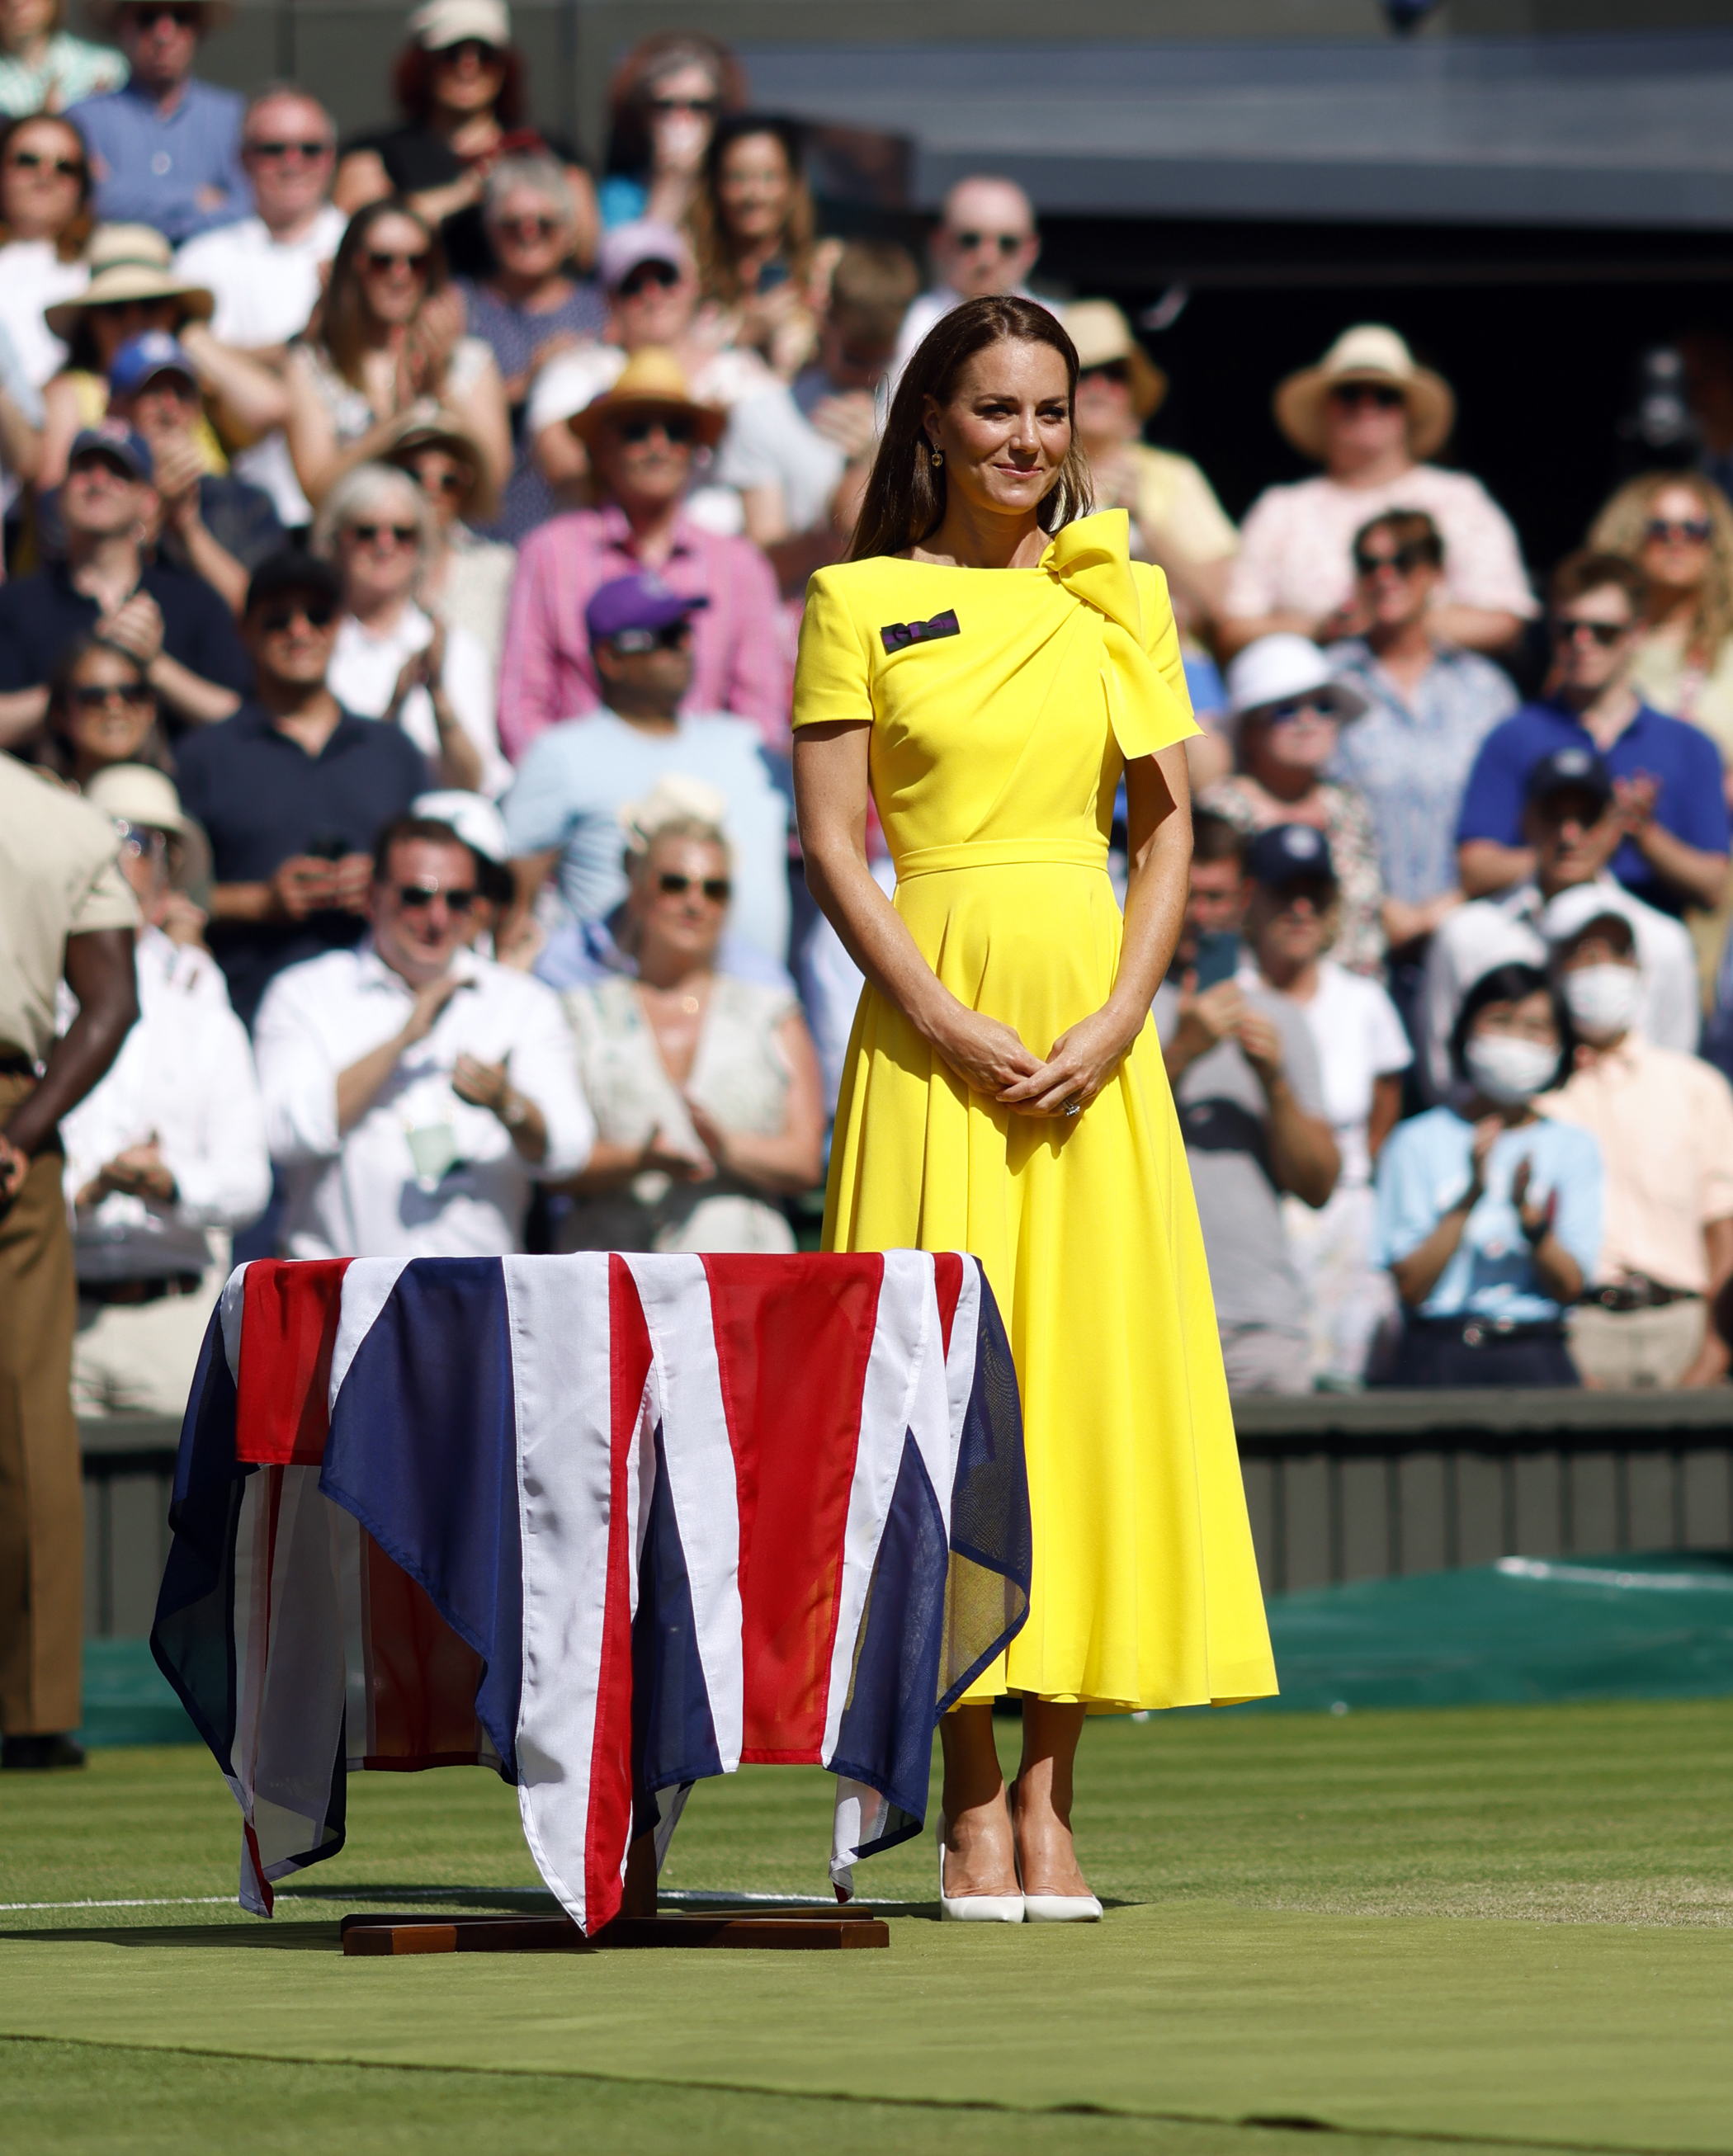 The Princess of Wales on Centre Court on day thirteen of the 2022 Wimbledon Championships